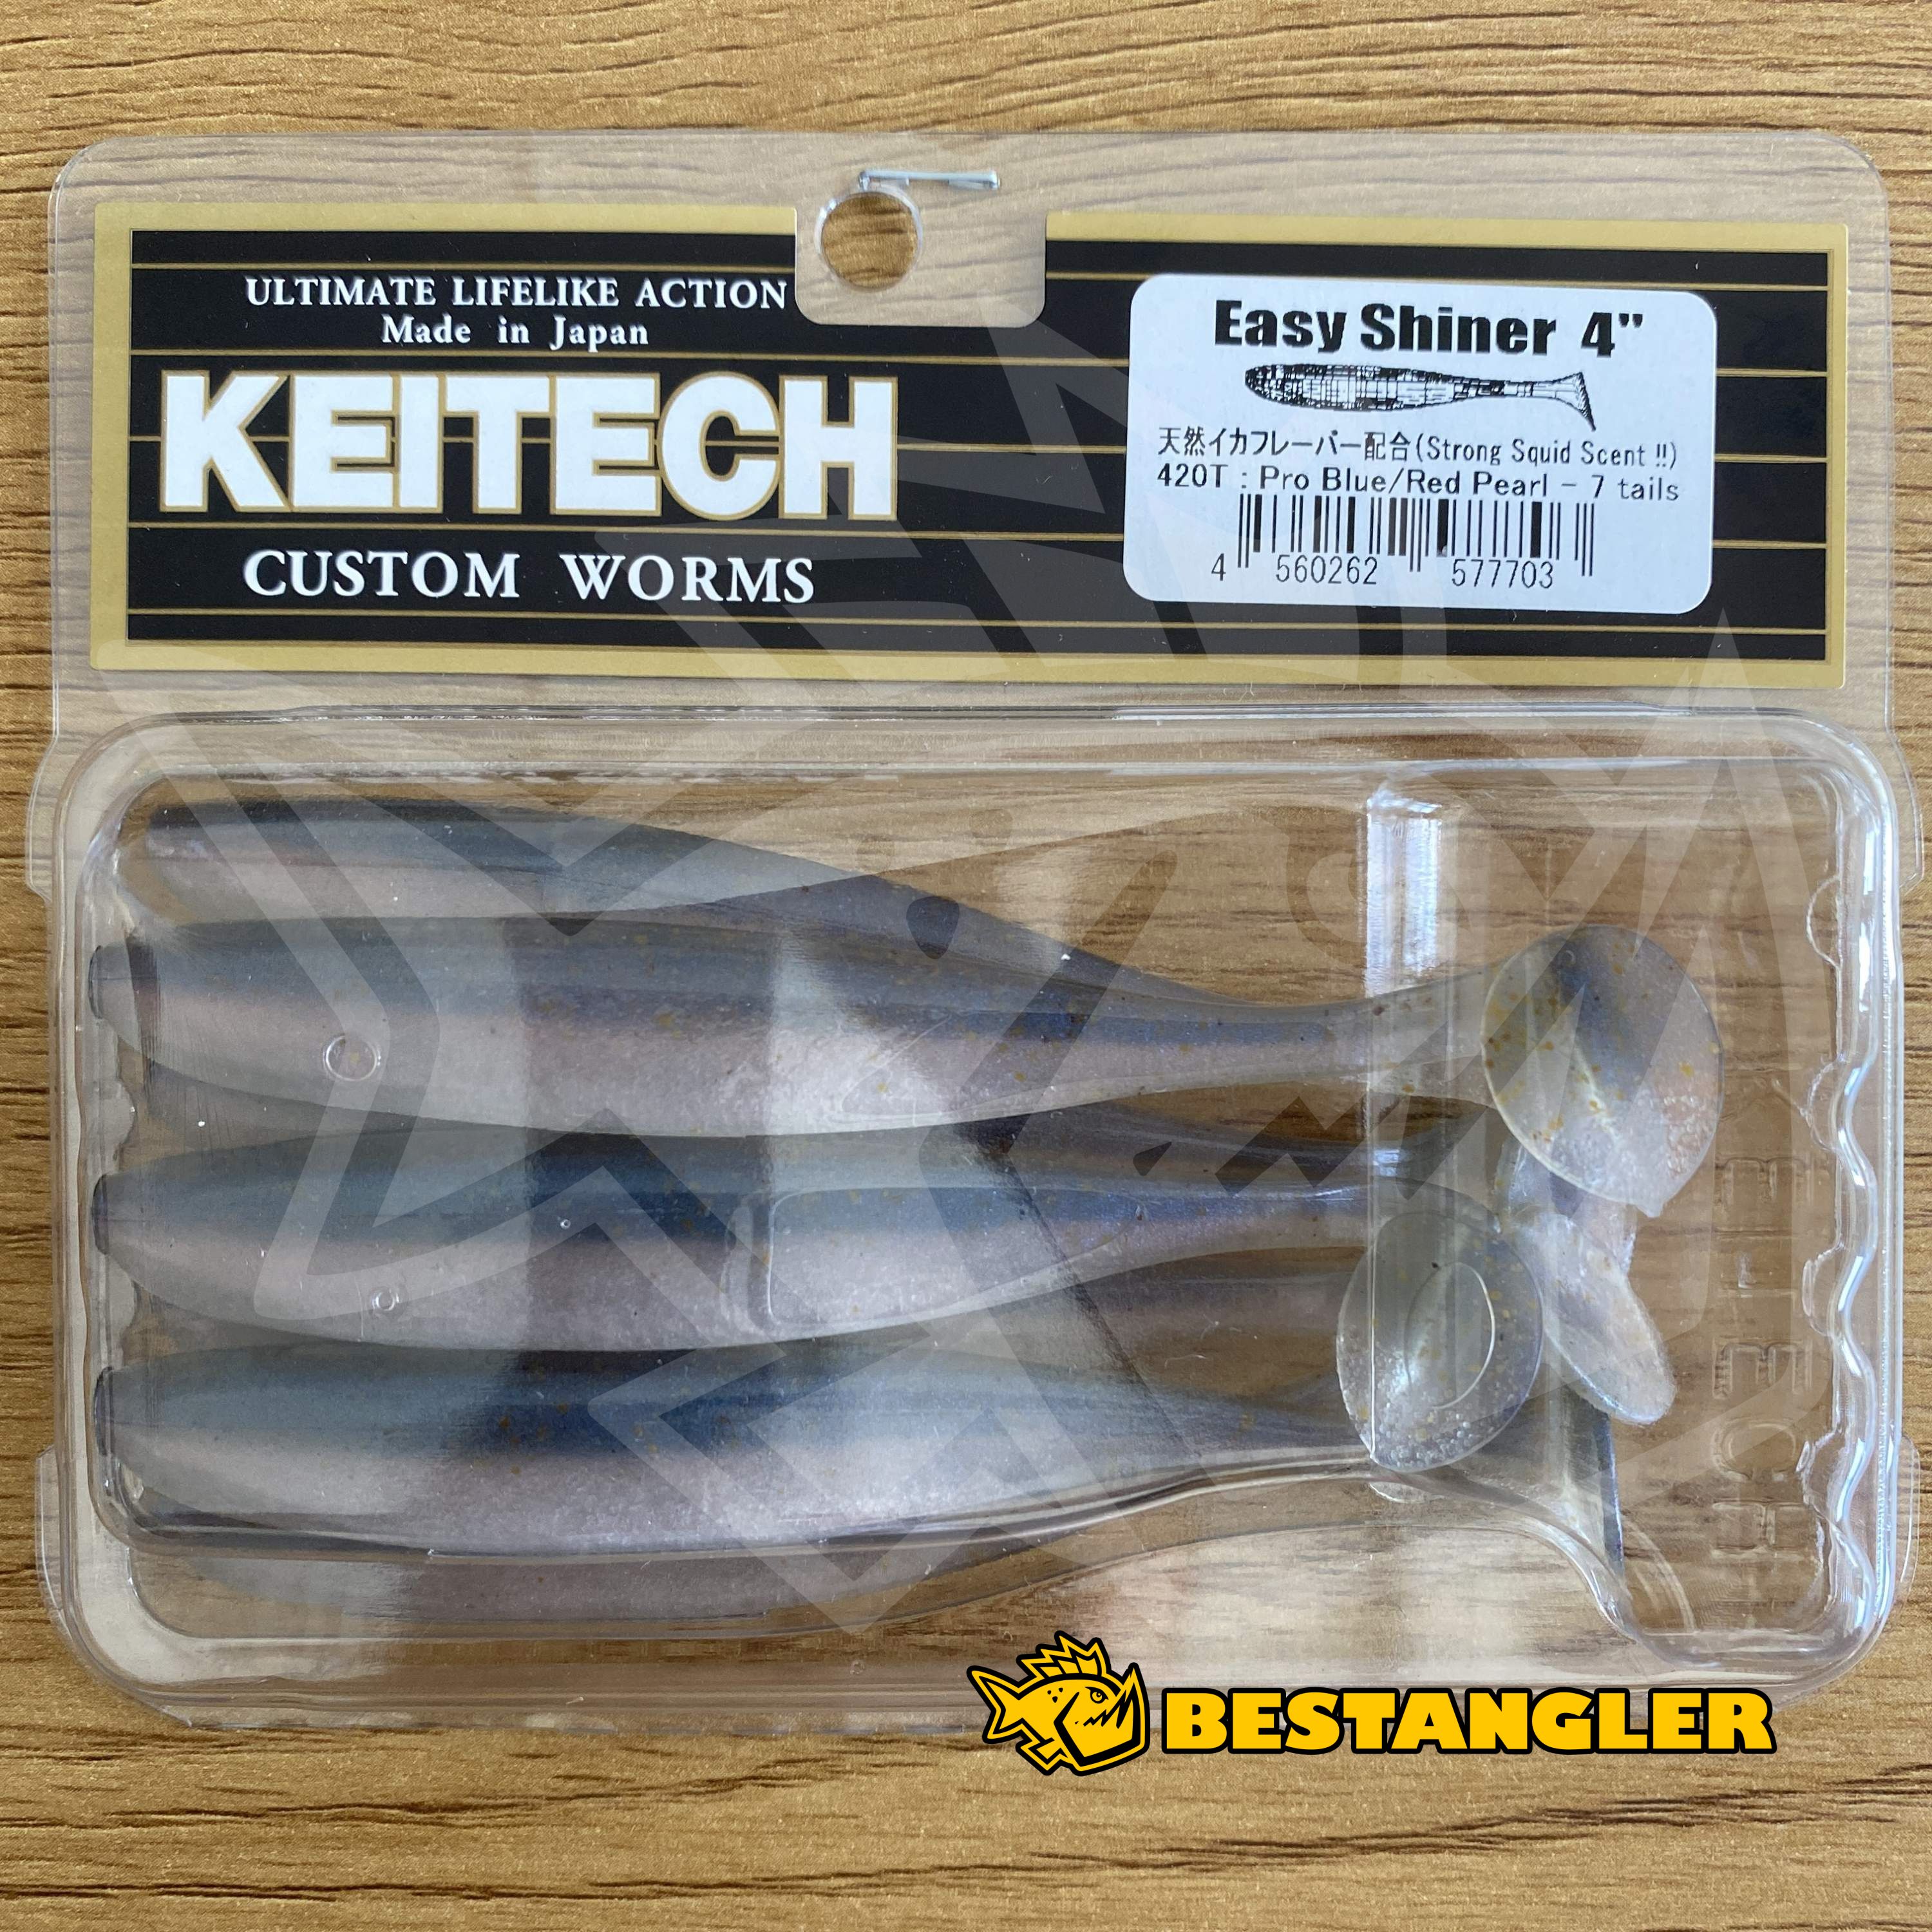 Keitech Easy Shiner 4 Pro Blue / Red Pearl